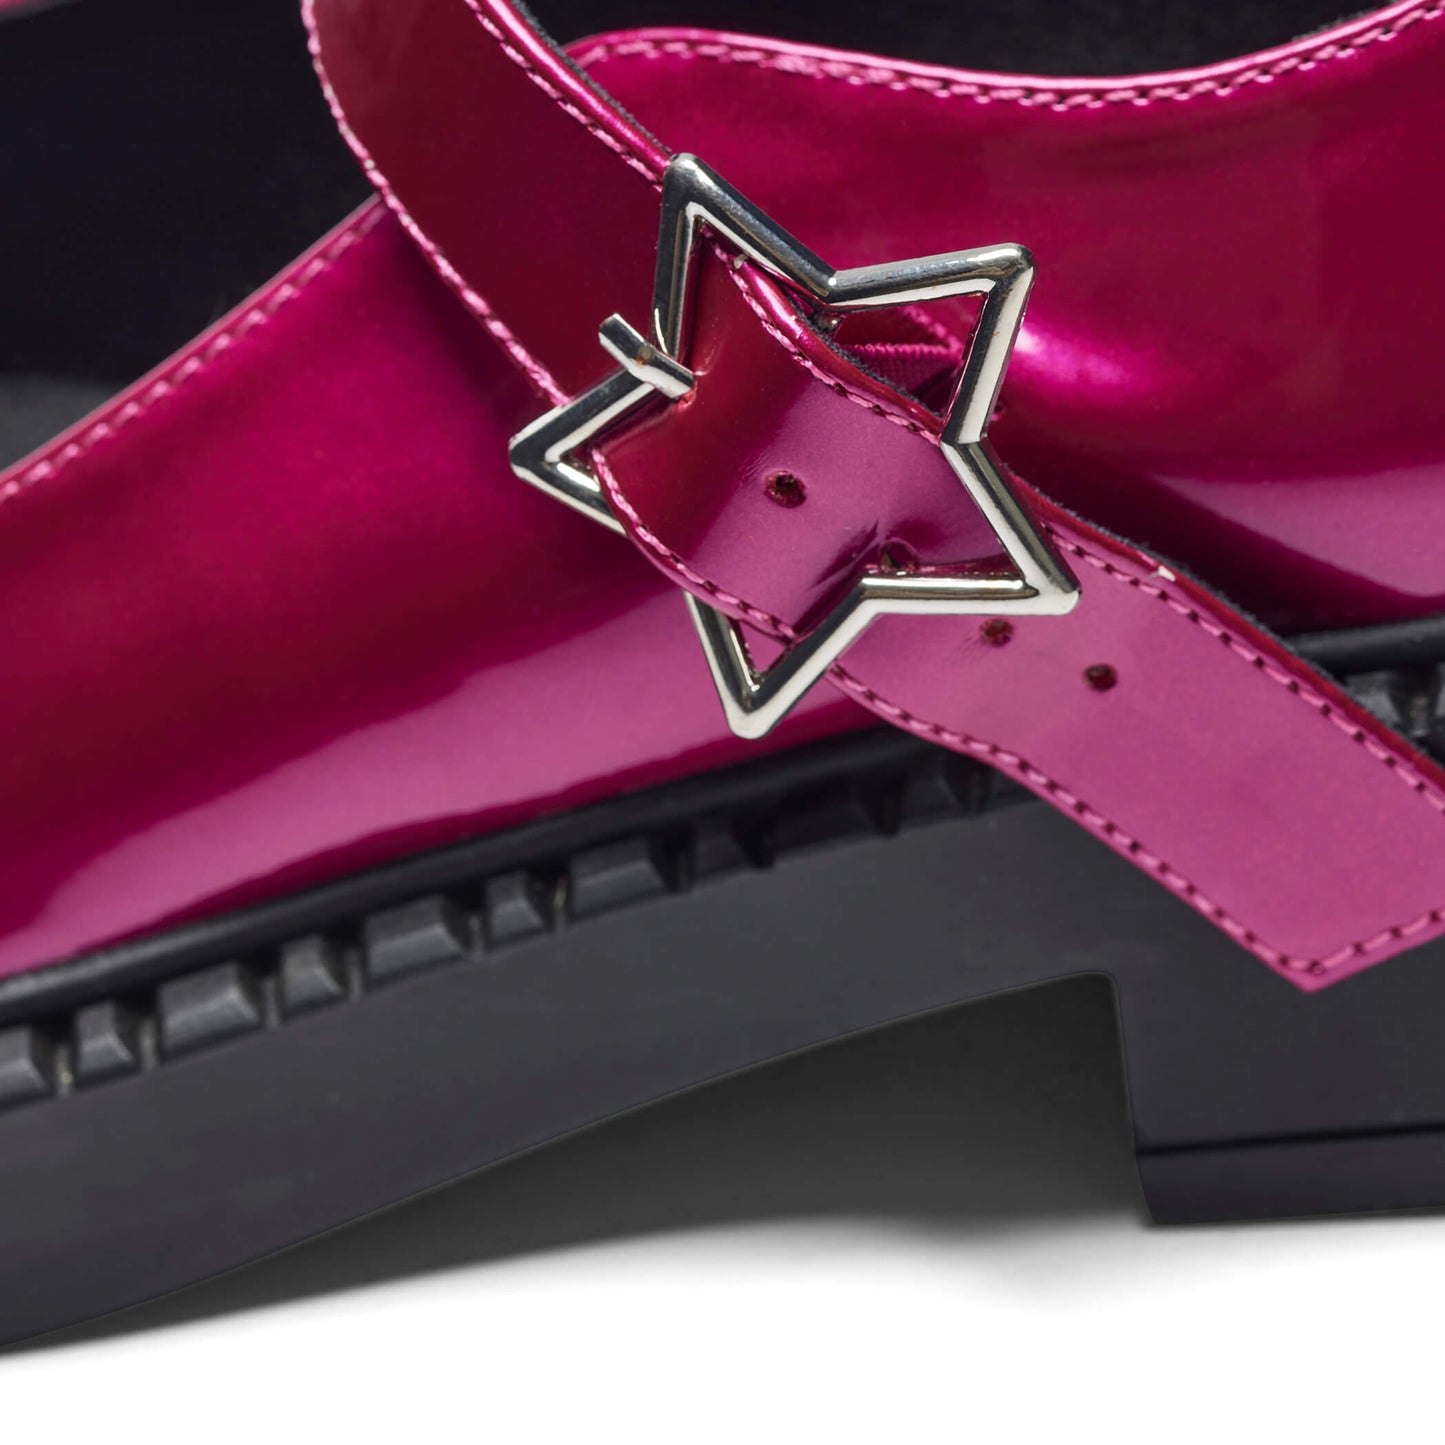 Astral Prime Tale Mary Janes - Candy Pink - KOI Footwear - Buckle Detail